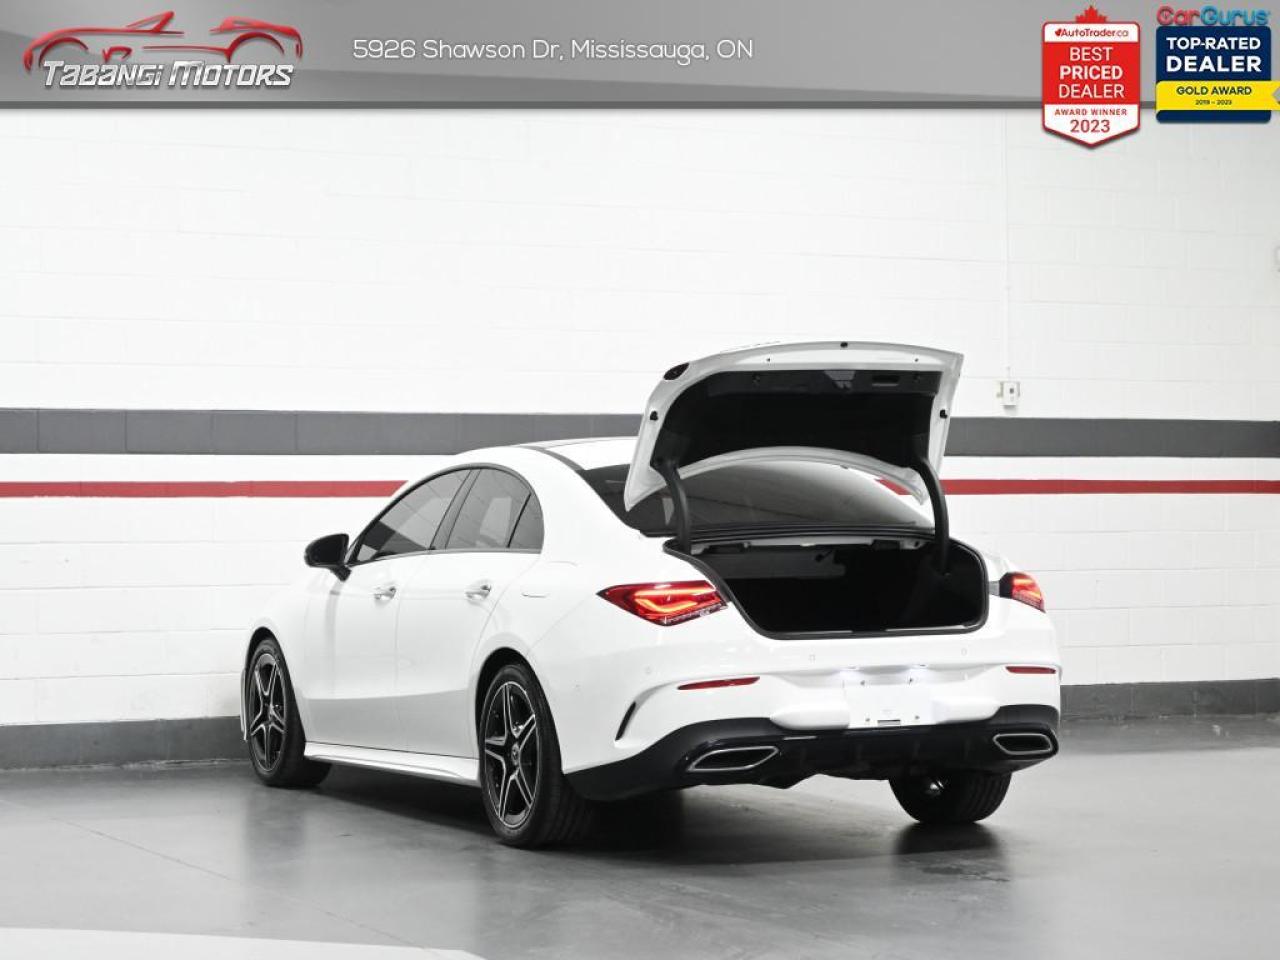 Used 2022 Mercedes-Benz CLA-Class 250 4MATIC No Accident AMG Night Pkg  360CAM Ambient Light for Sale in Mississauga